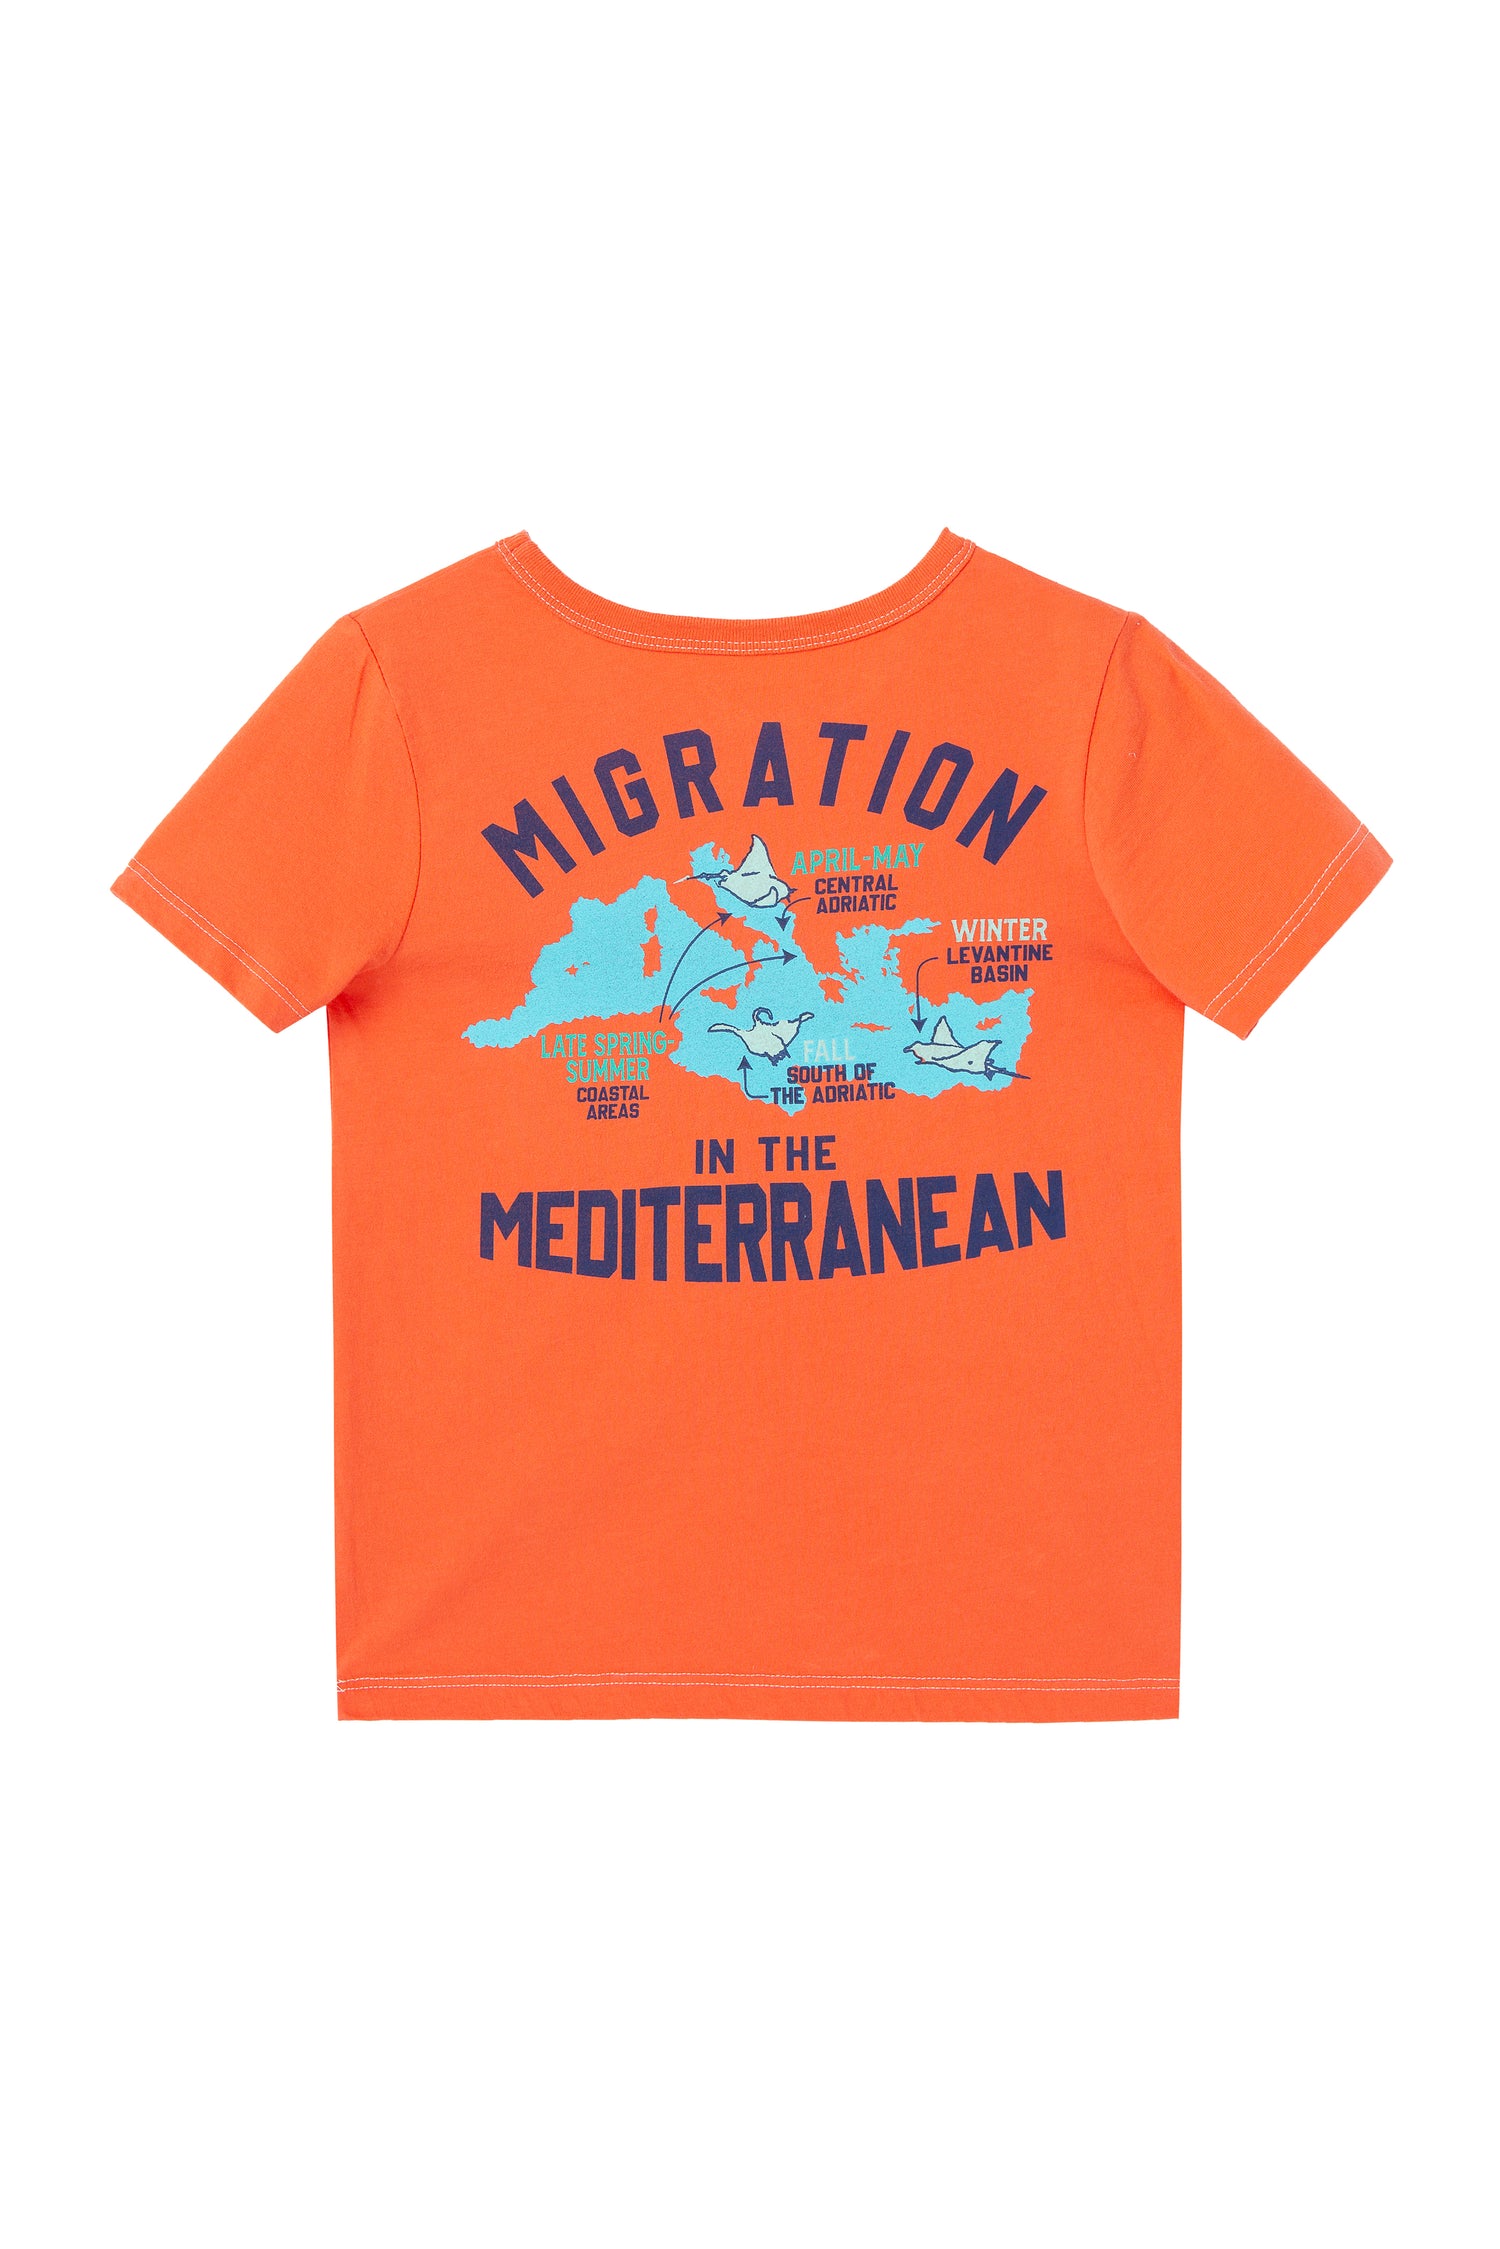 Front view Orange tee with blue image of the Mediterranean map 